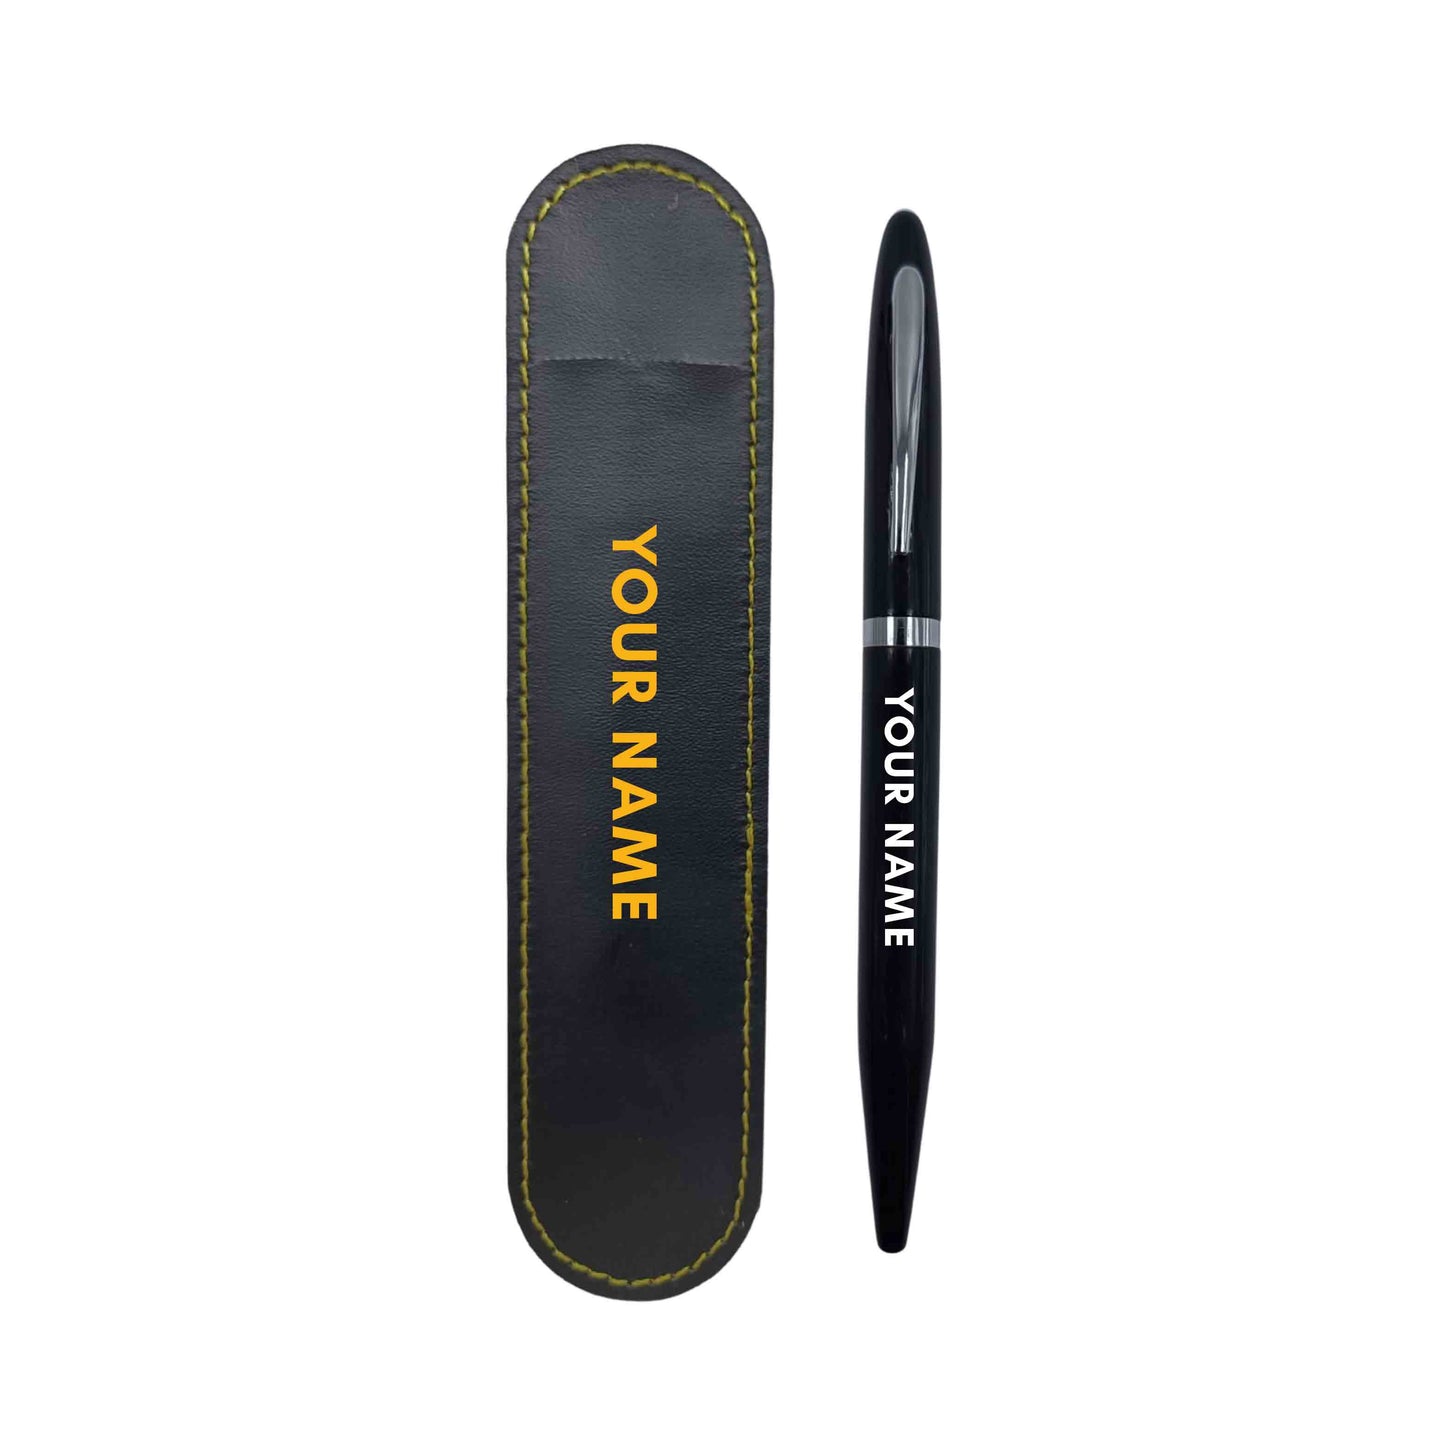 Customized Name Printed Pen Engraved Corporate Gifts for Office ( Black)  - Name